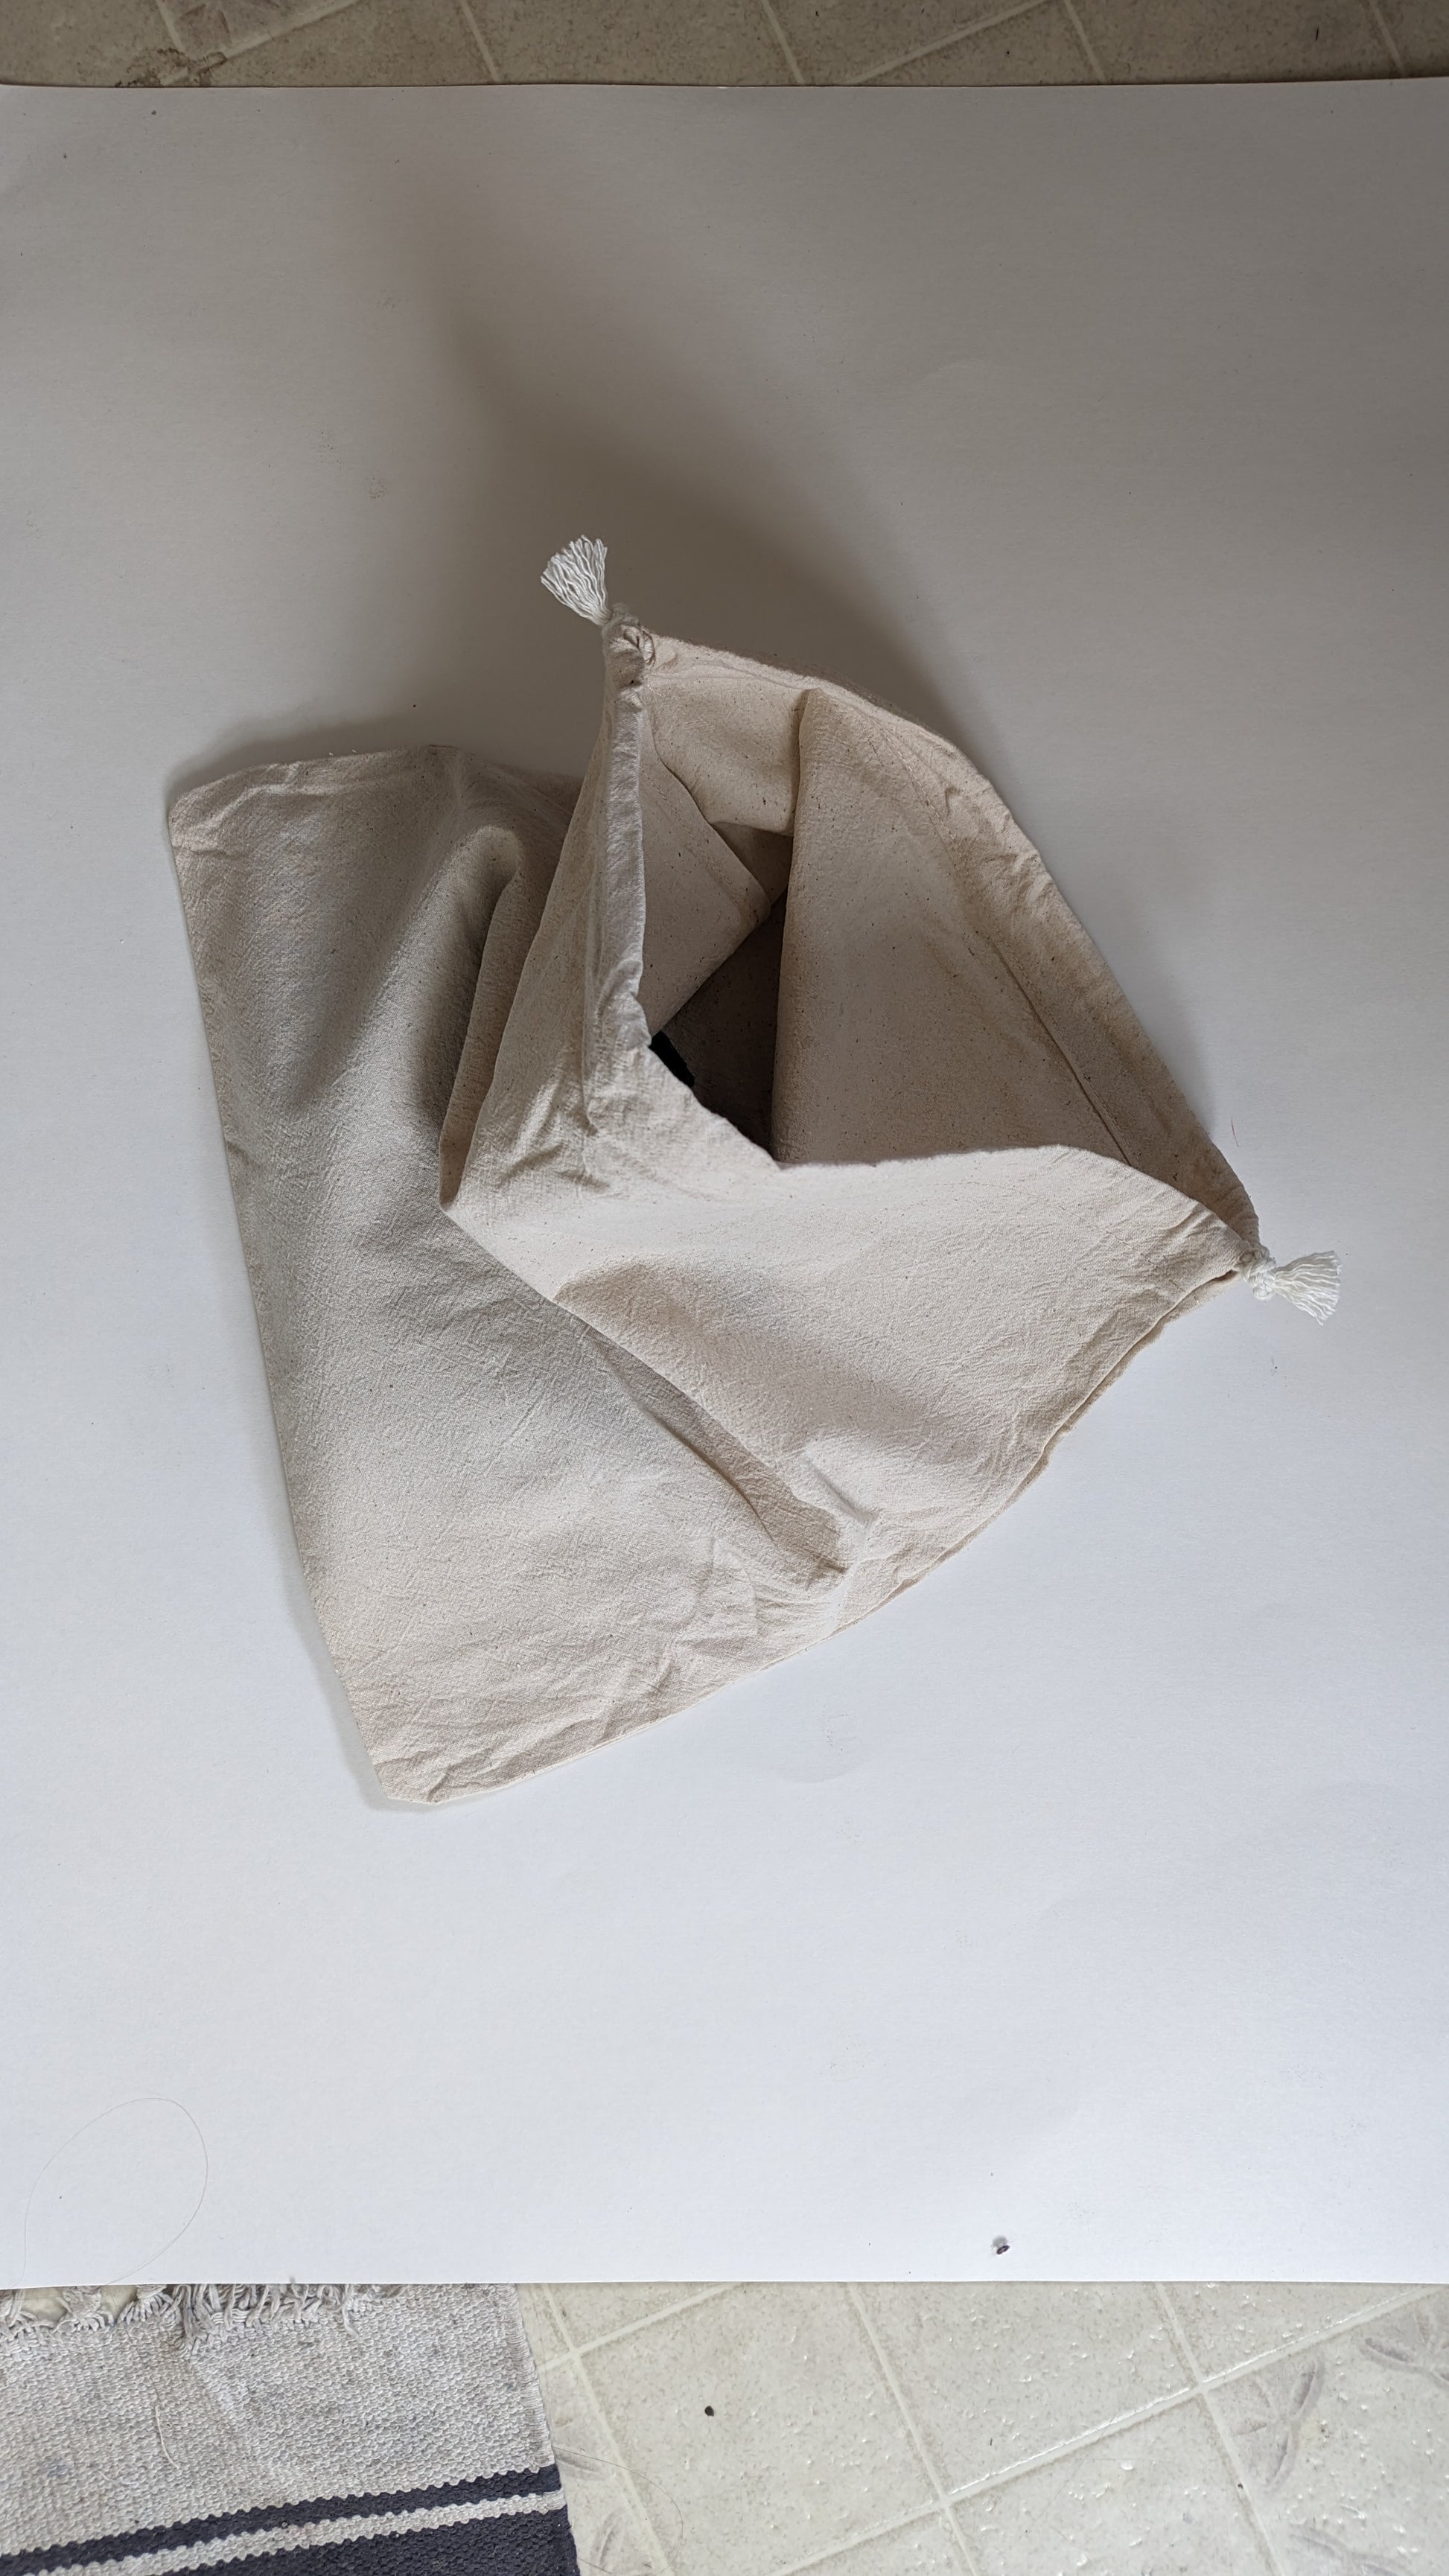 The Wash Bag - Organic Cotton Washable Drawstring Bag by Connally Goods